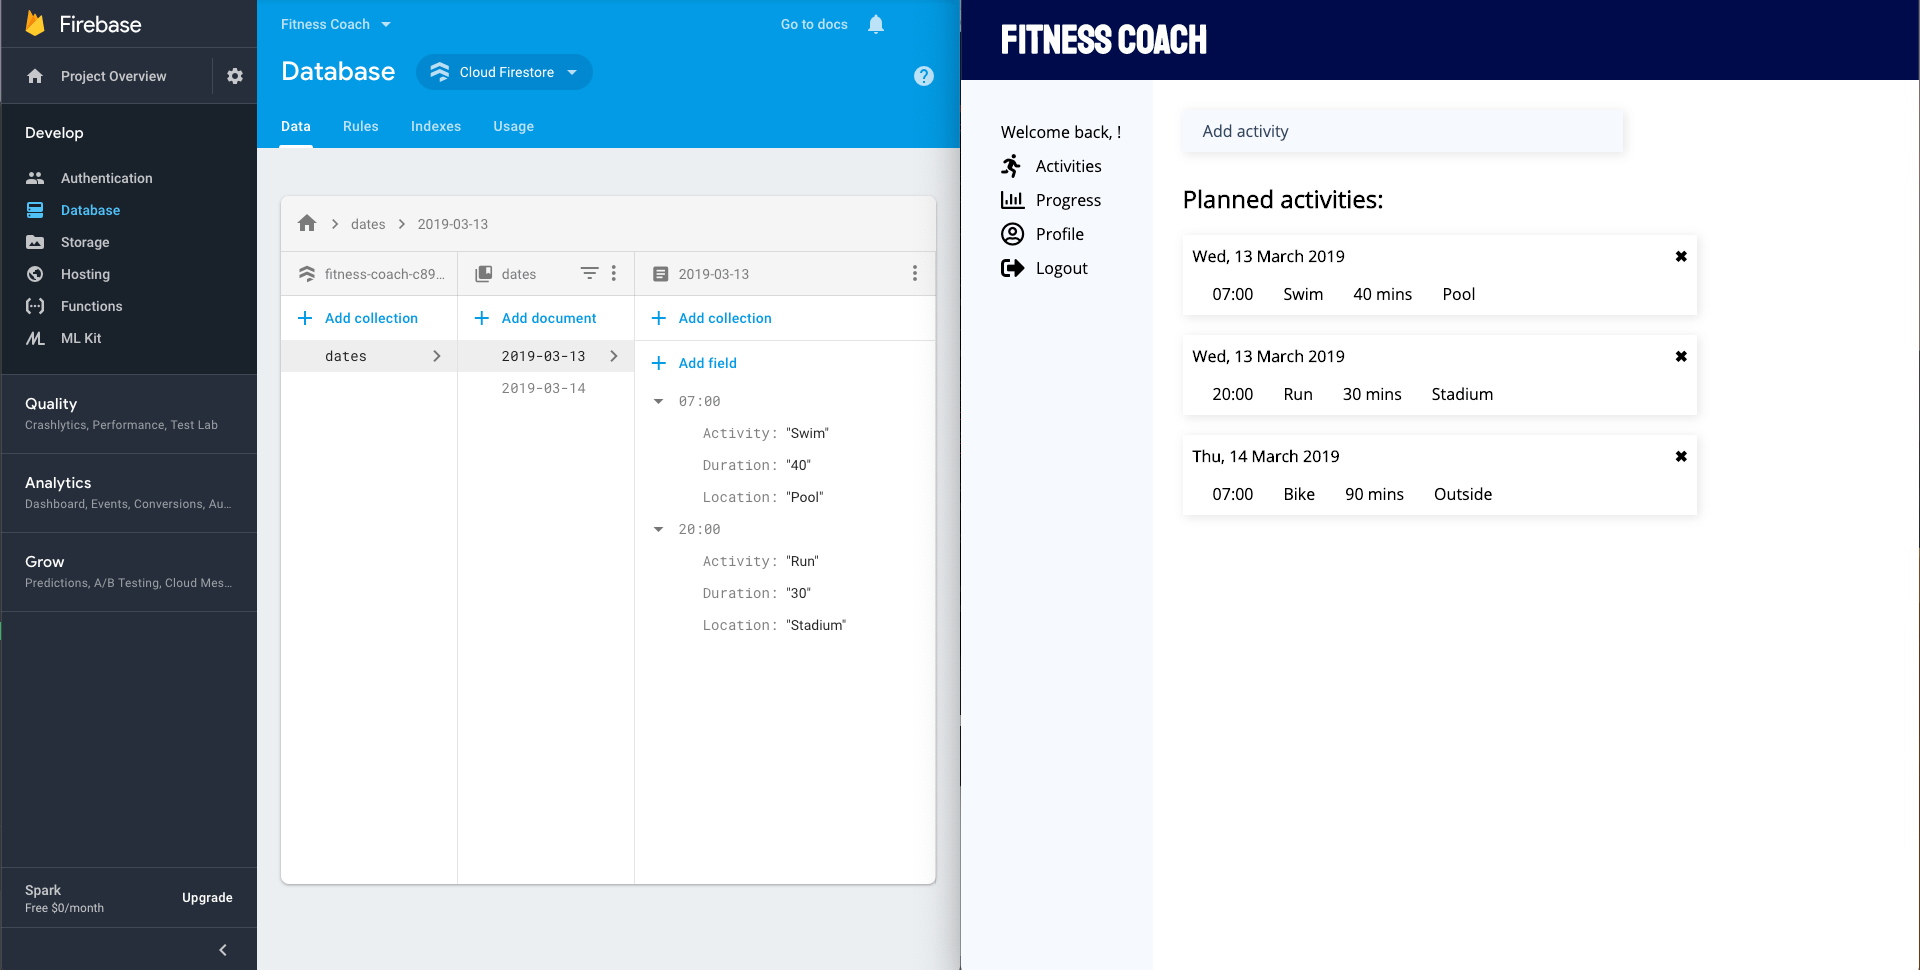 My incomplete fitness web app